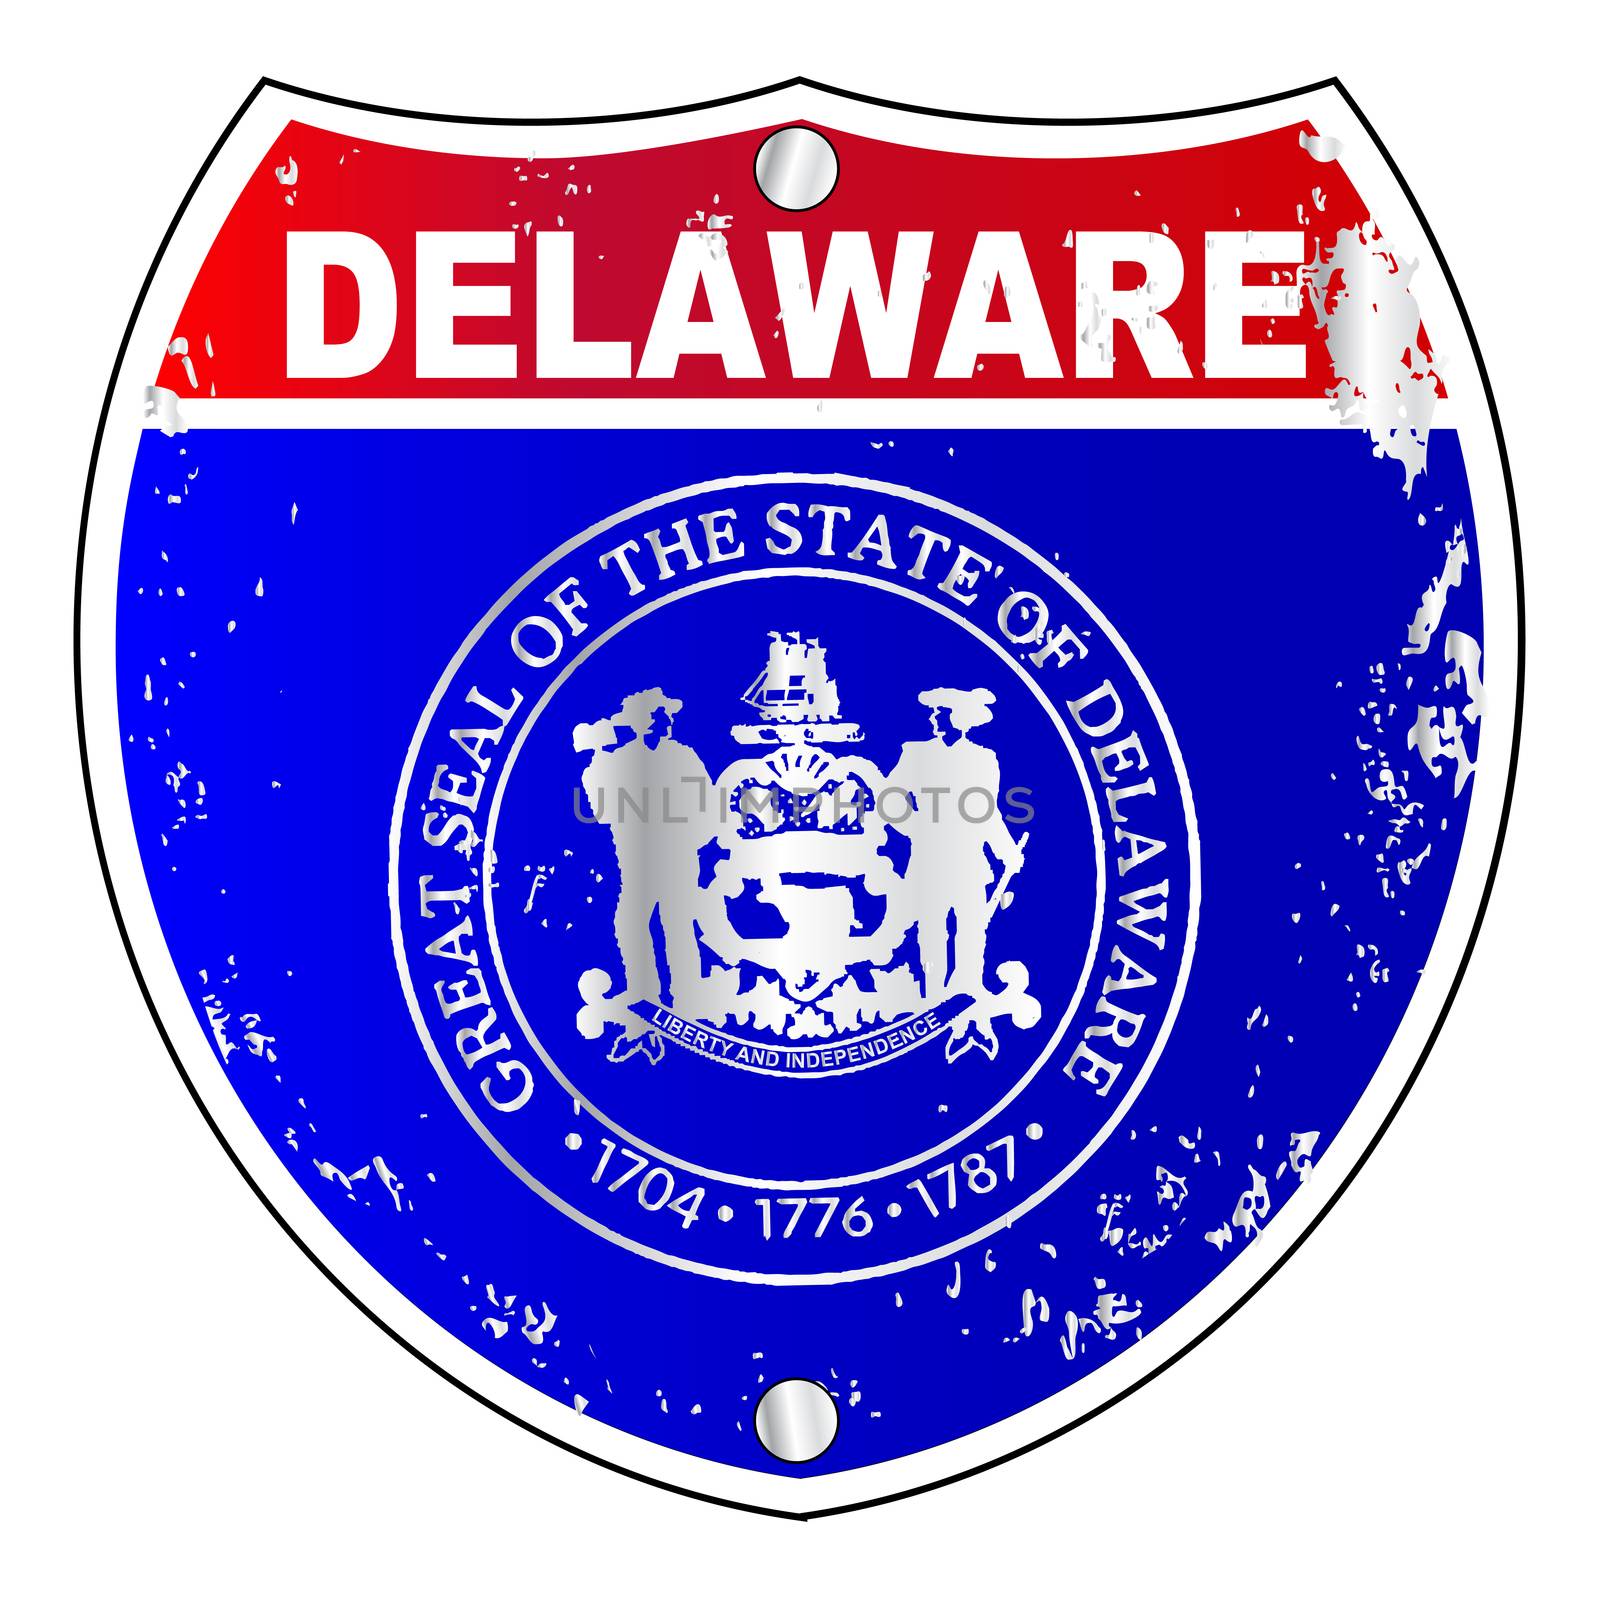 Delaware interstate sign with flag cross over a white background